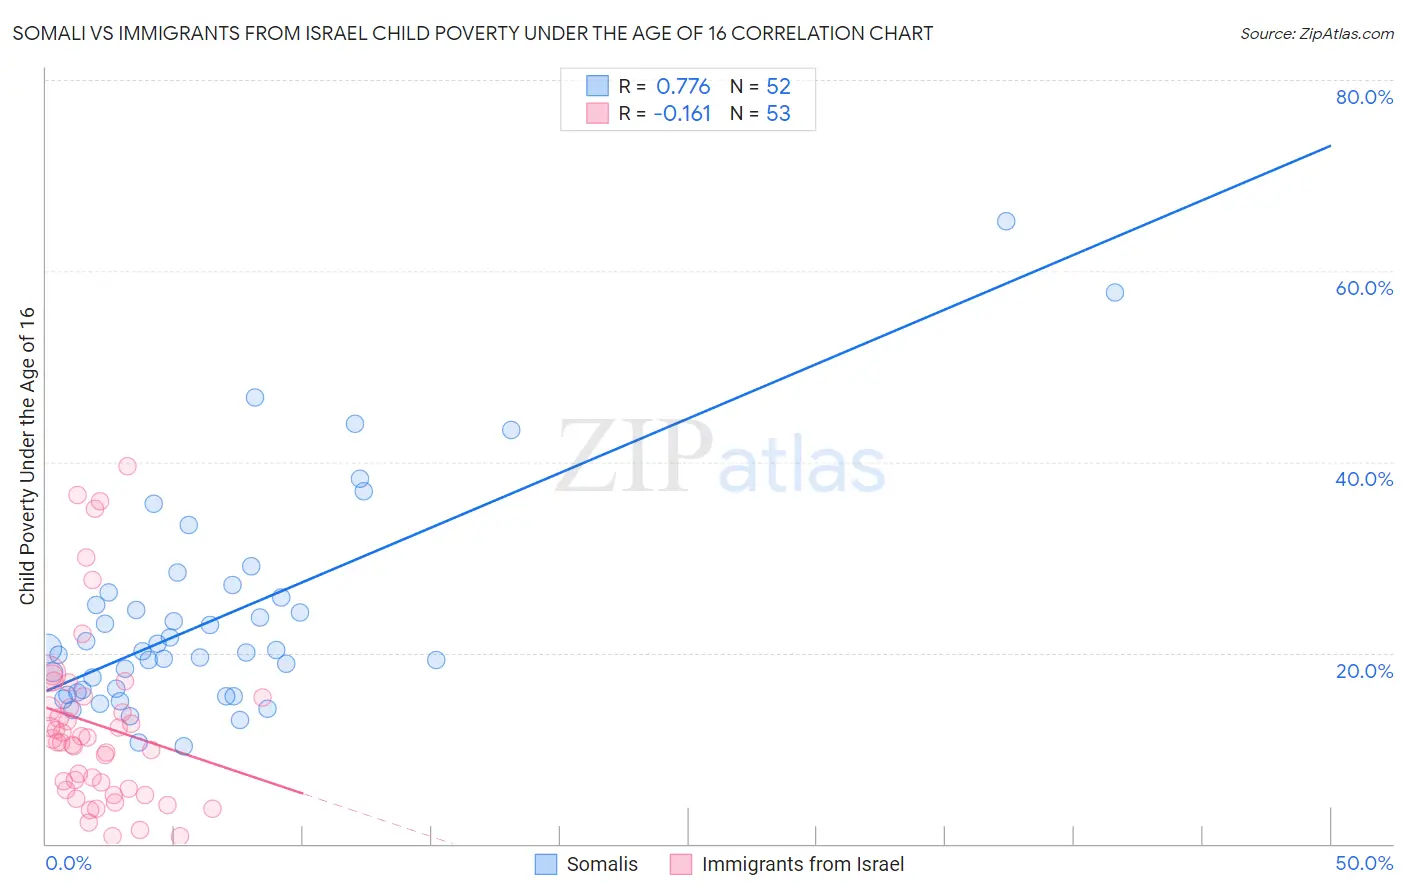 Somali vs Immigrants from Israel Child Poverty Under the Age of 16